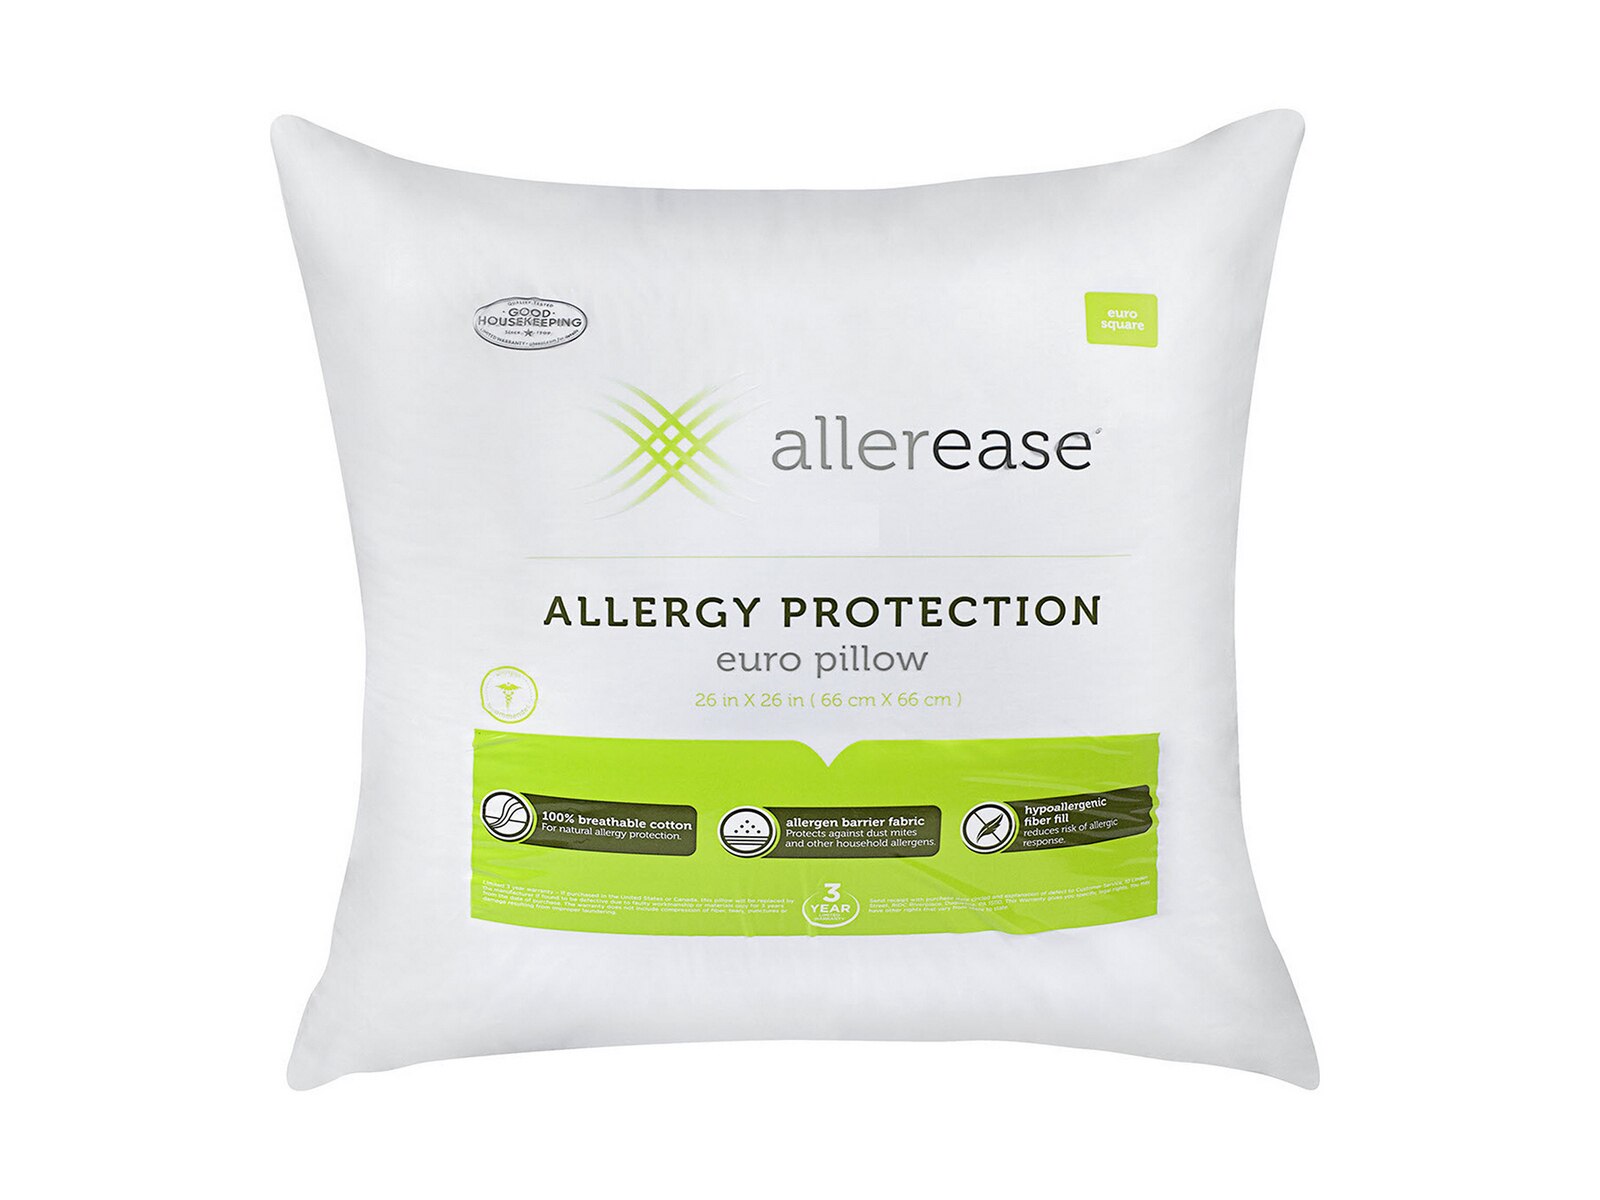 allerease mattress protection review